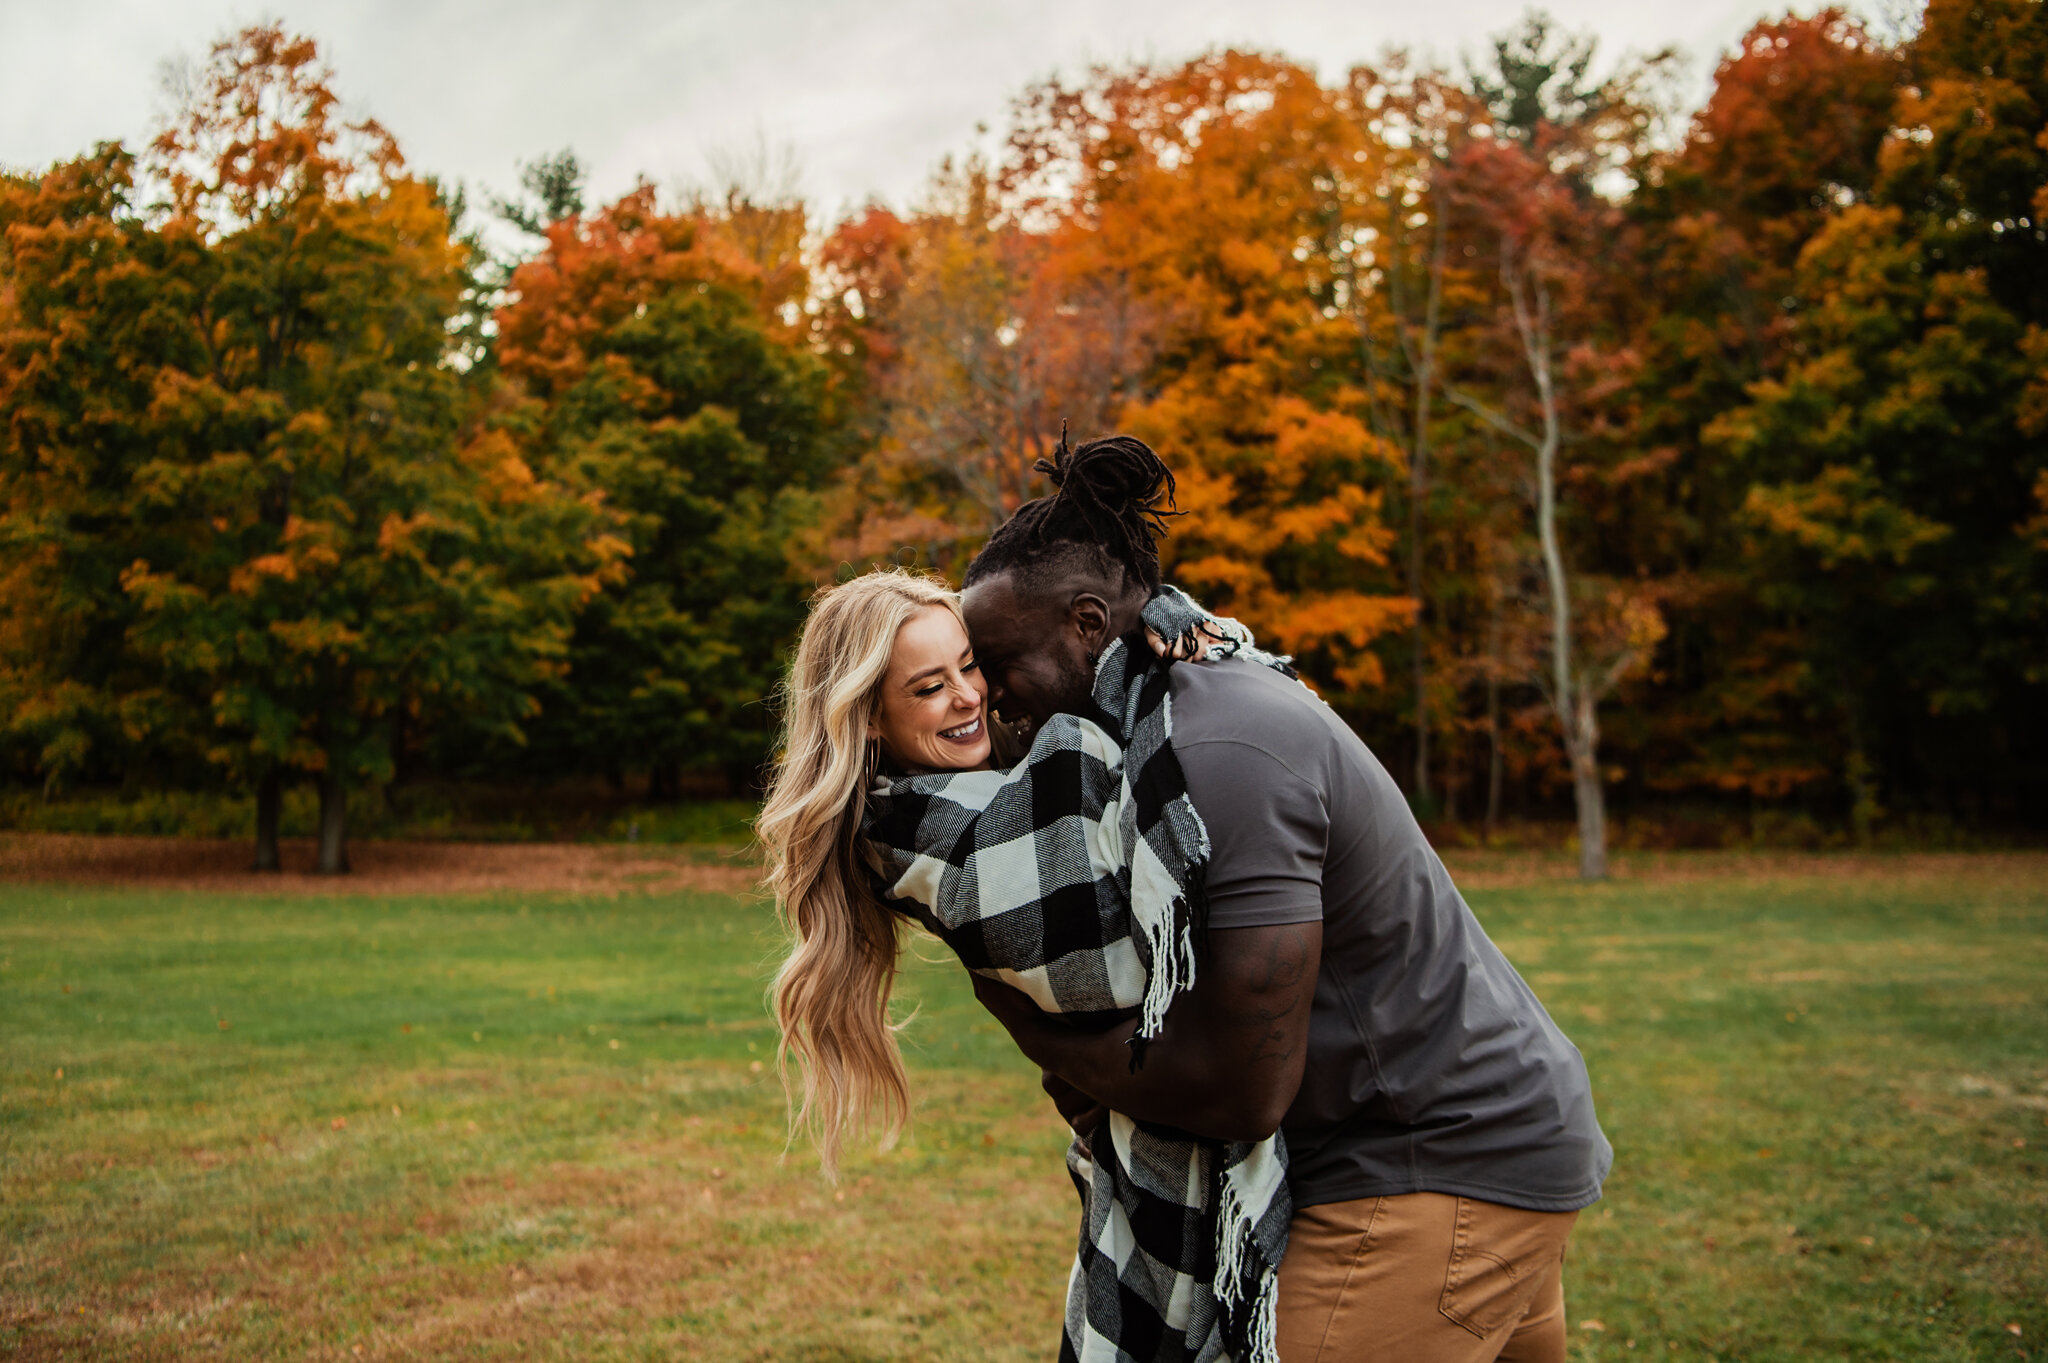 Letchworth_State_Park_Rochester_Couples_Session_JILL_STUDIO_Rochester_NY_Photographer_9601.jpg